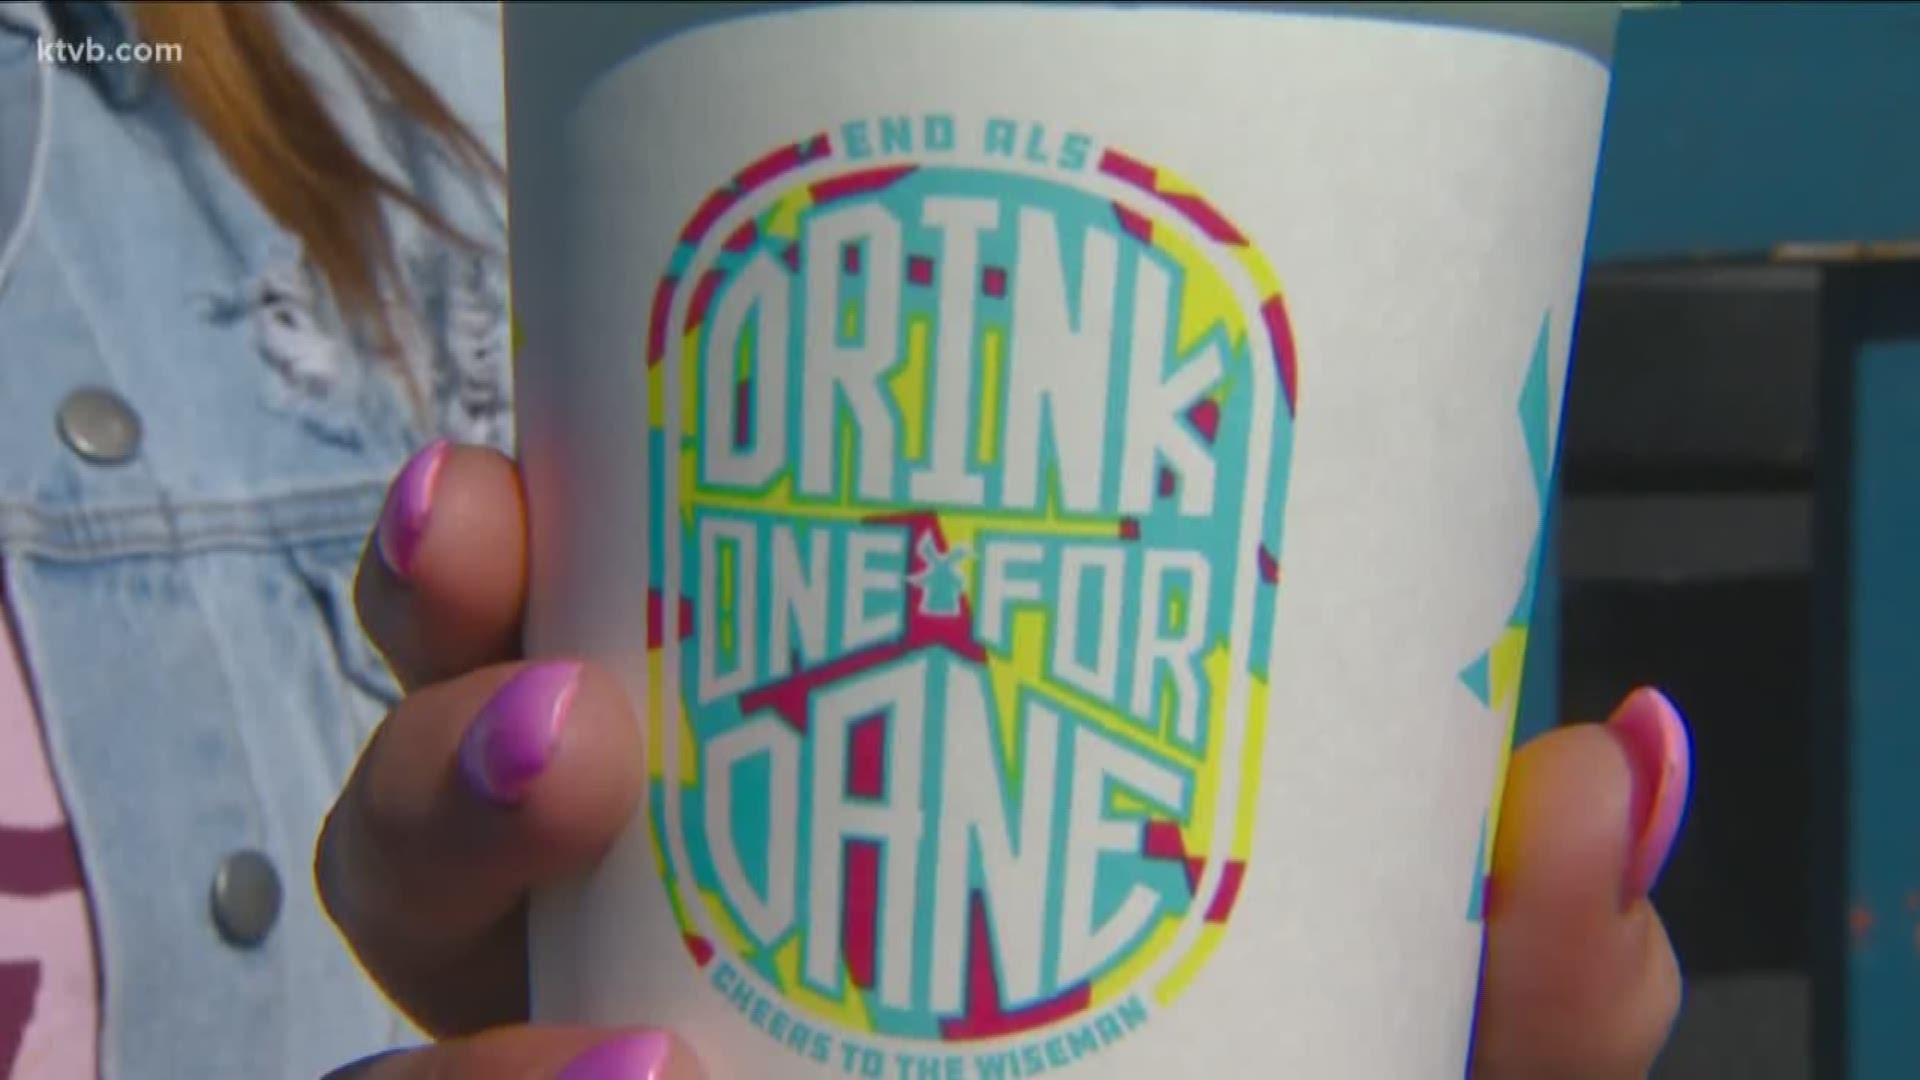 More than 330 Dutch Bros are taking part in the annual Drink One for Dane fundraiser.